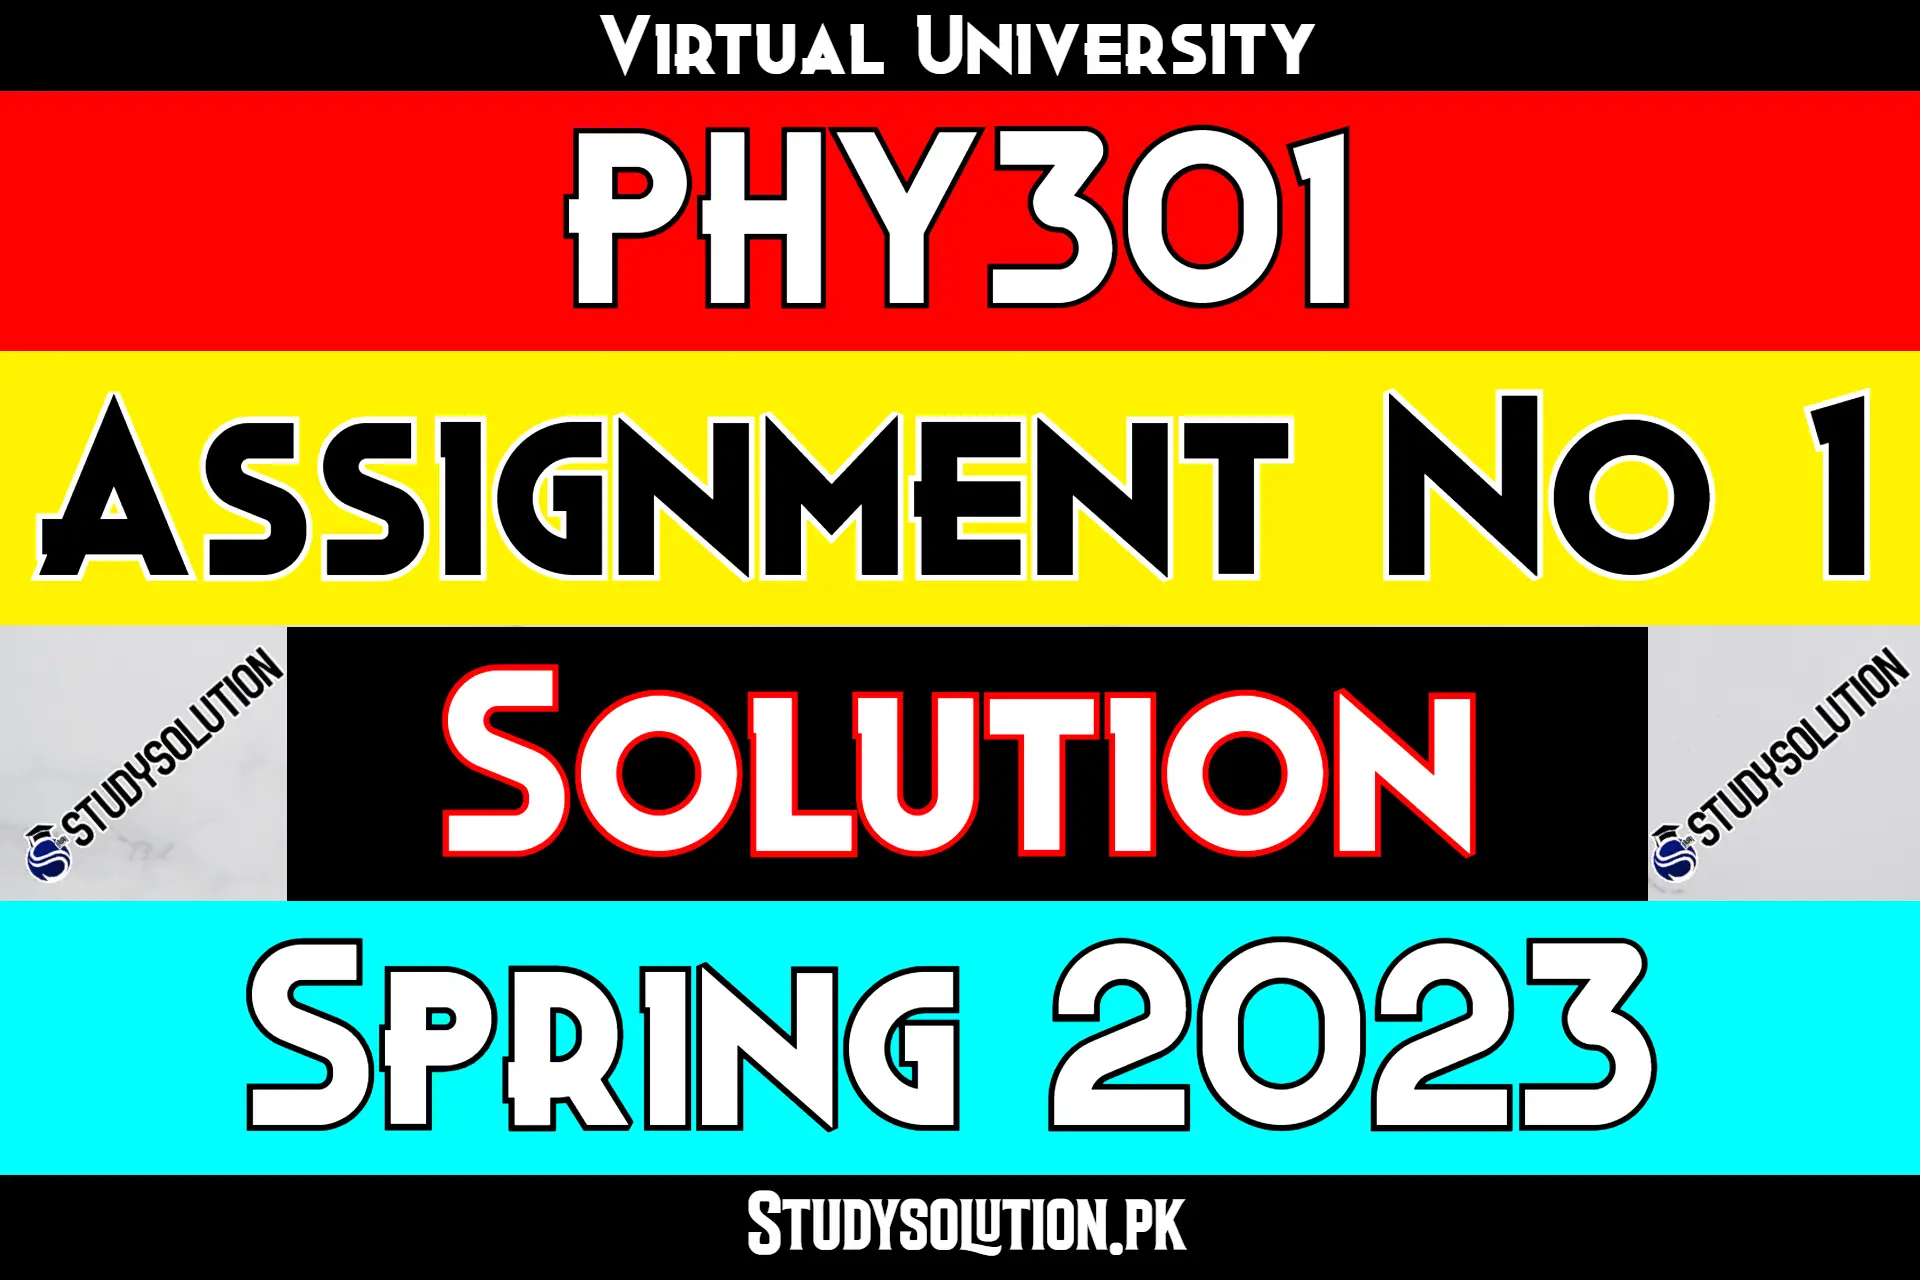 PHY301 Assignment No 1 Solution Spring 2023